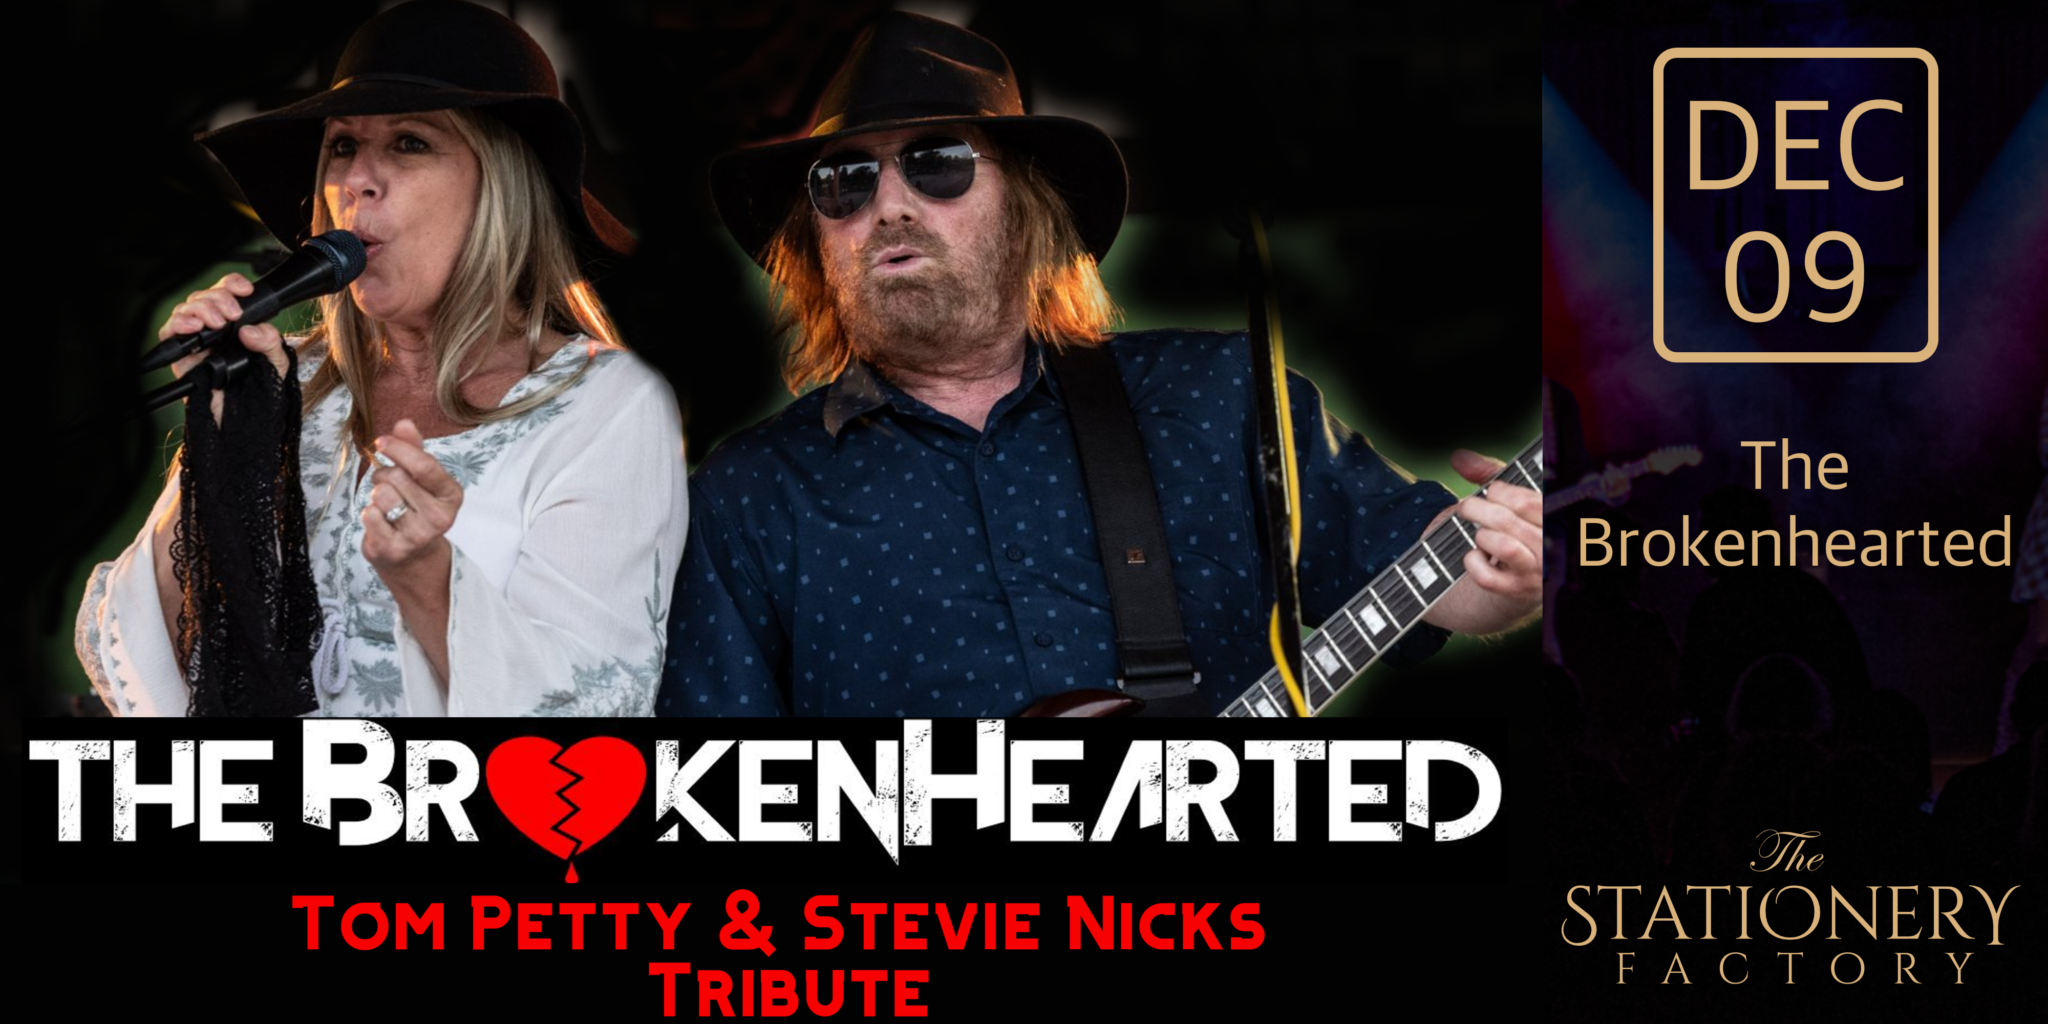 The BrokenHearted band is all about recreating the vibe of a Tom Petty & Stevie Nicks concert.